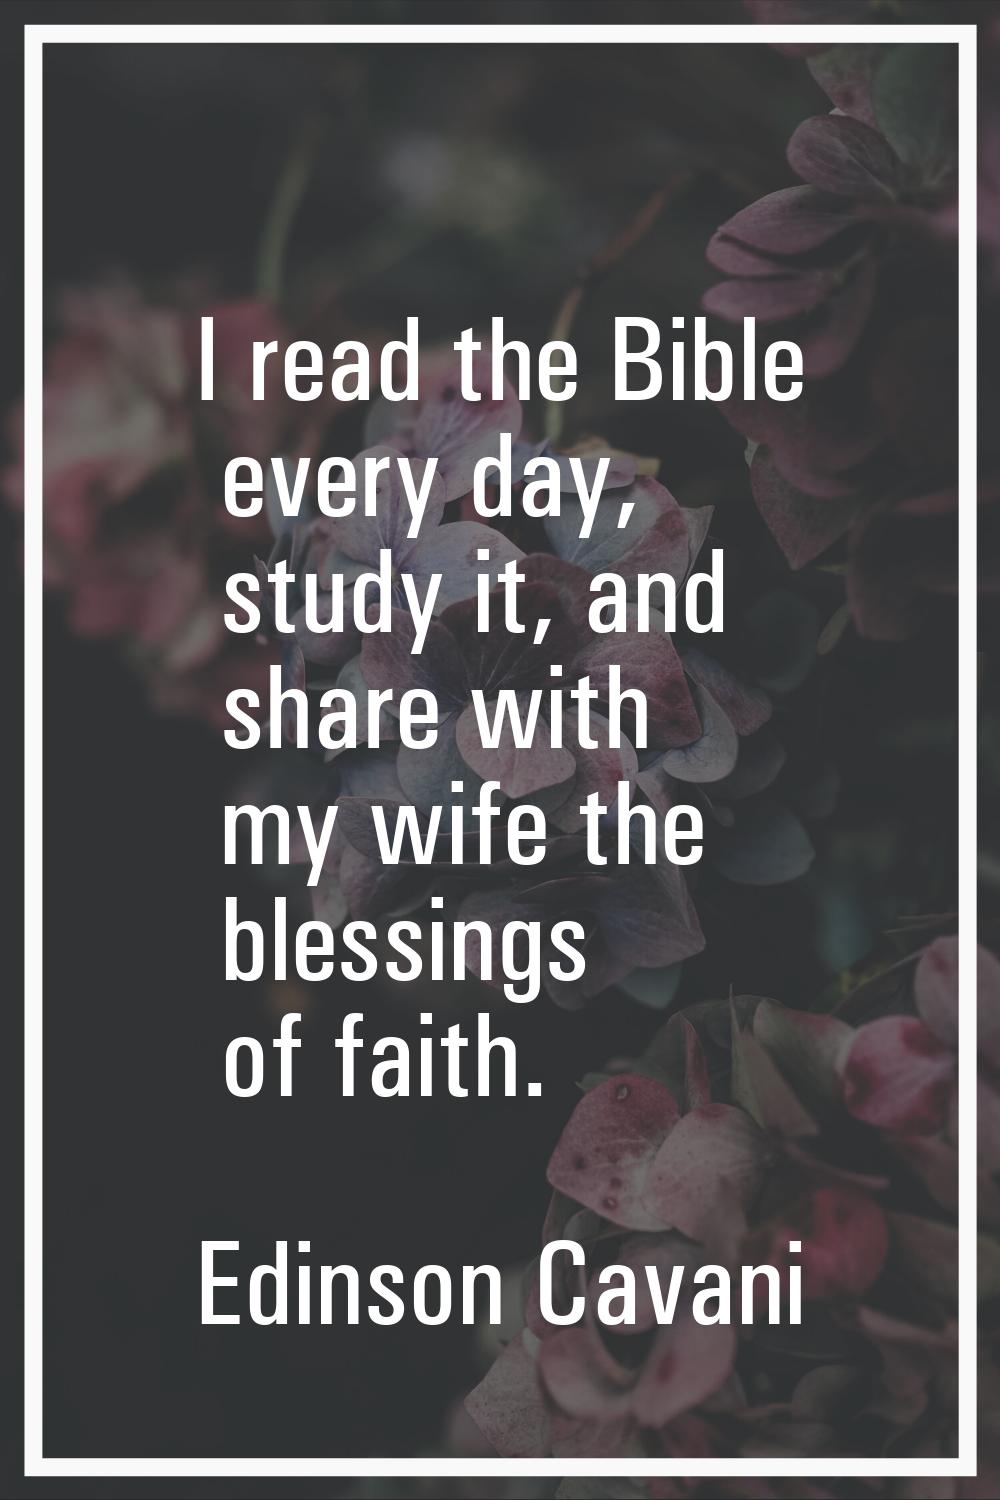 I read the Bible every day, study it, and share with my wife the blessings of faith.